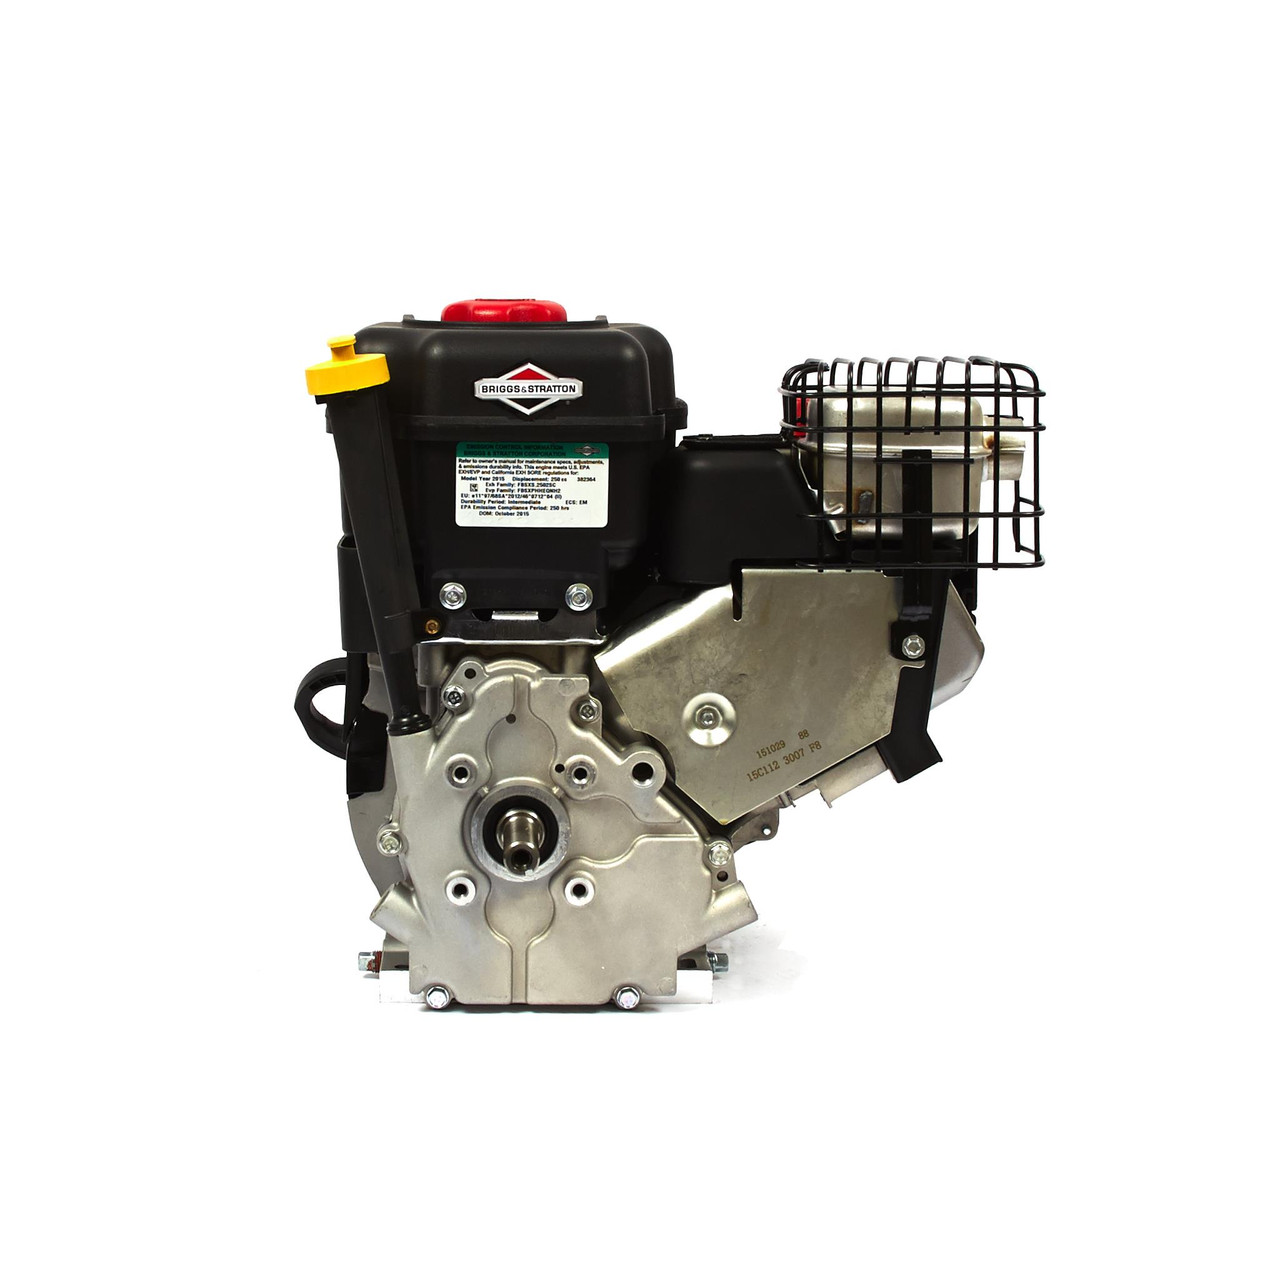 Professional Snow Series 11.5 GT 250cc Horizontal Shaft Engine 15C112-3007-F8 (Limited availability then discontinued)